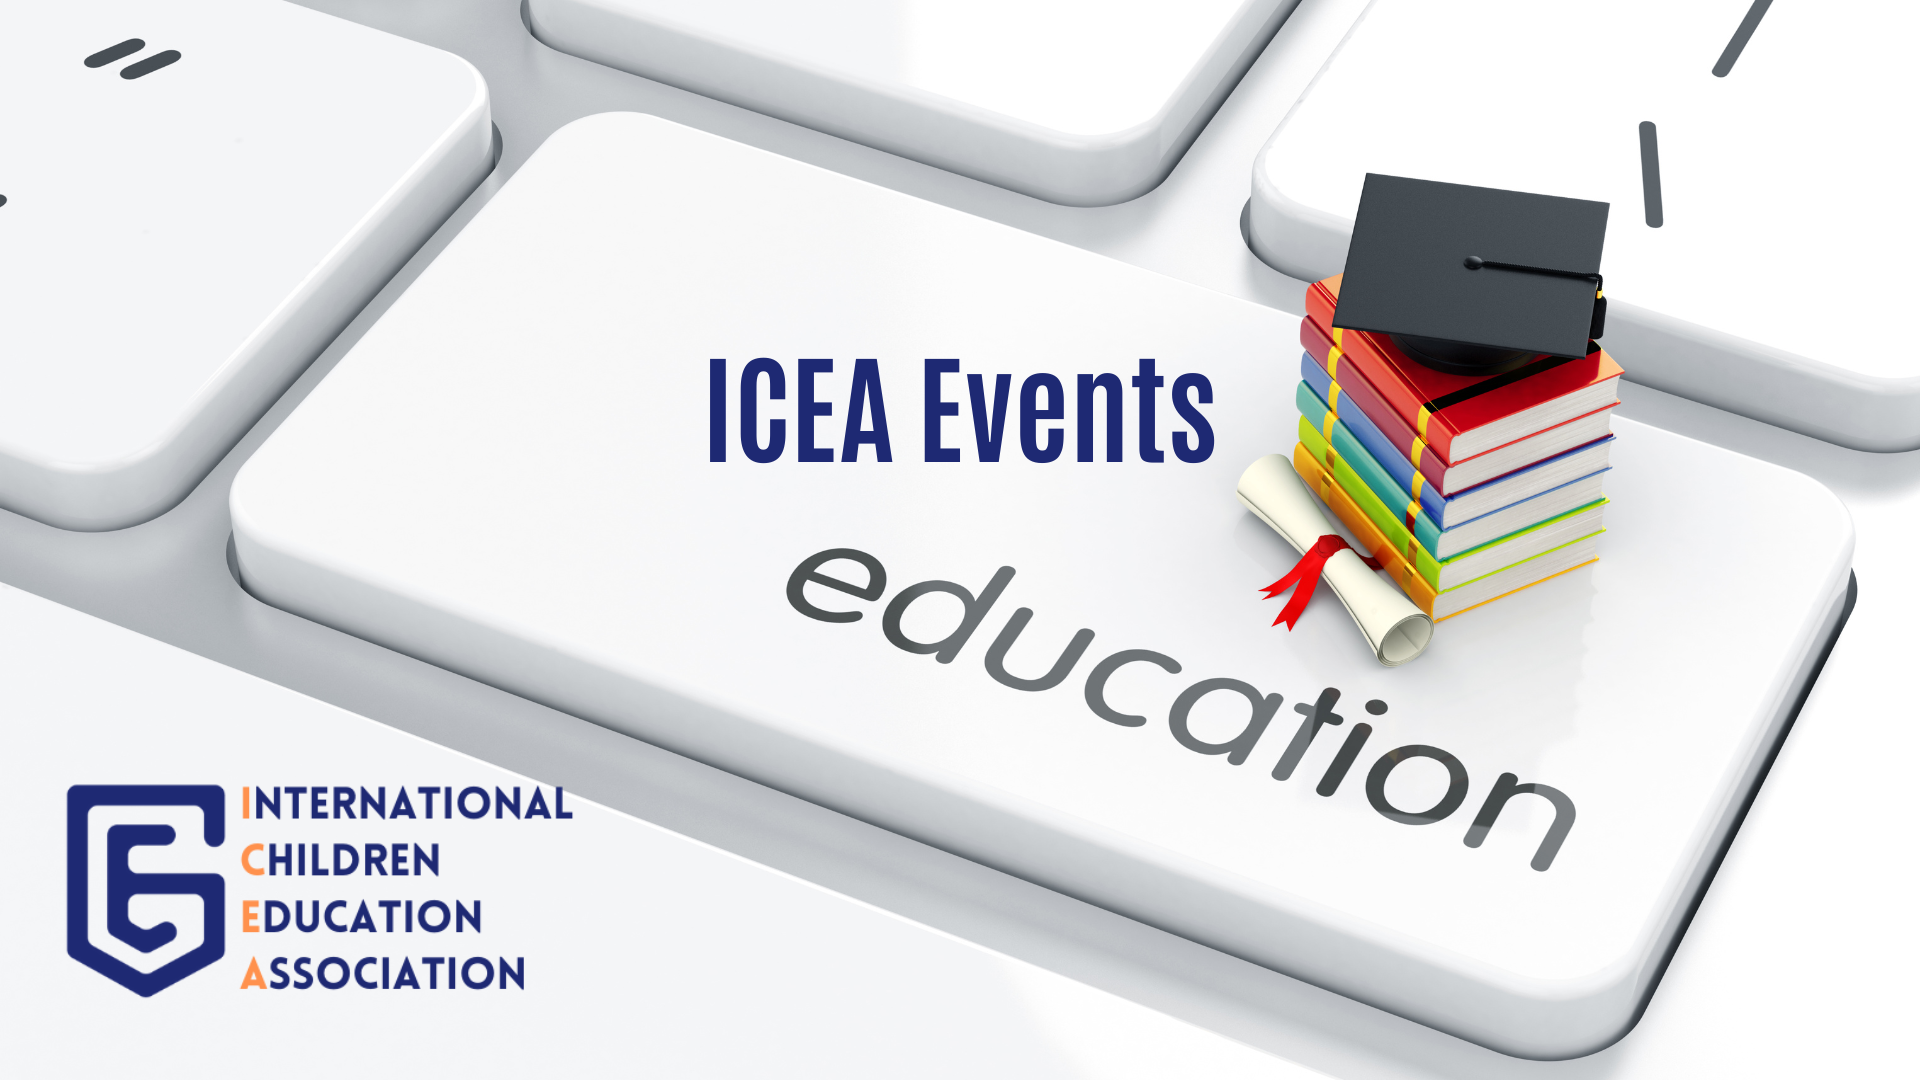 ICEA Events